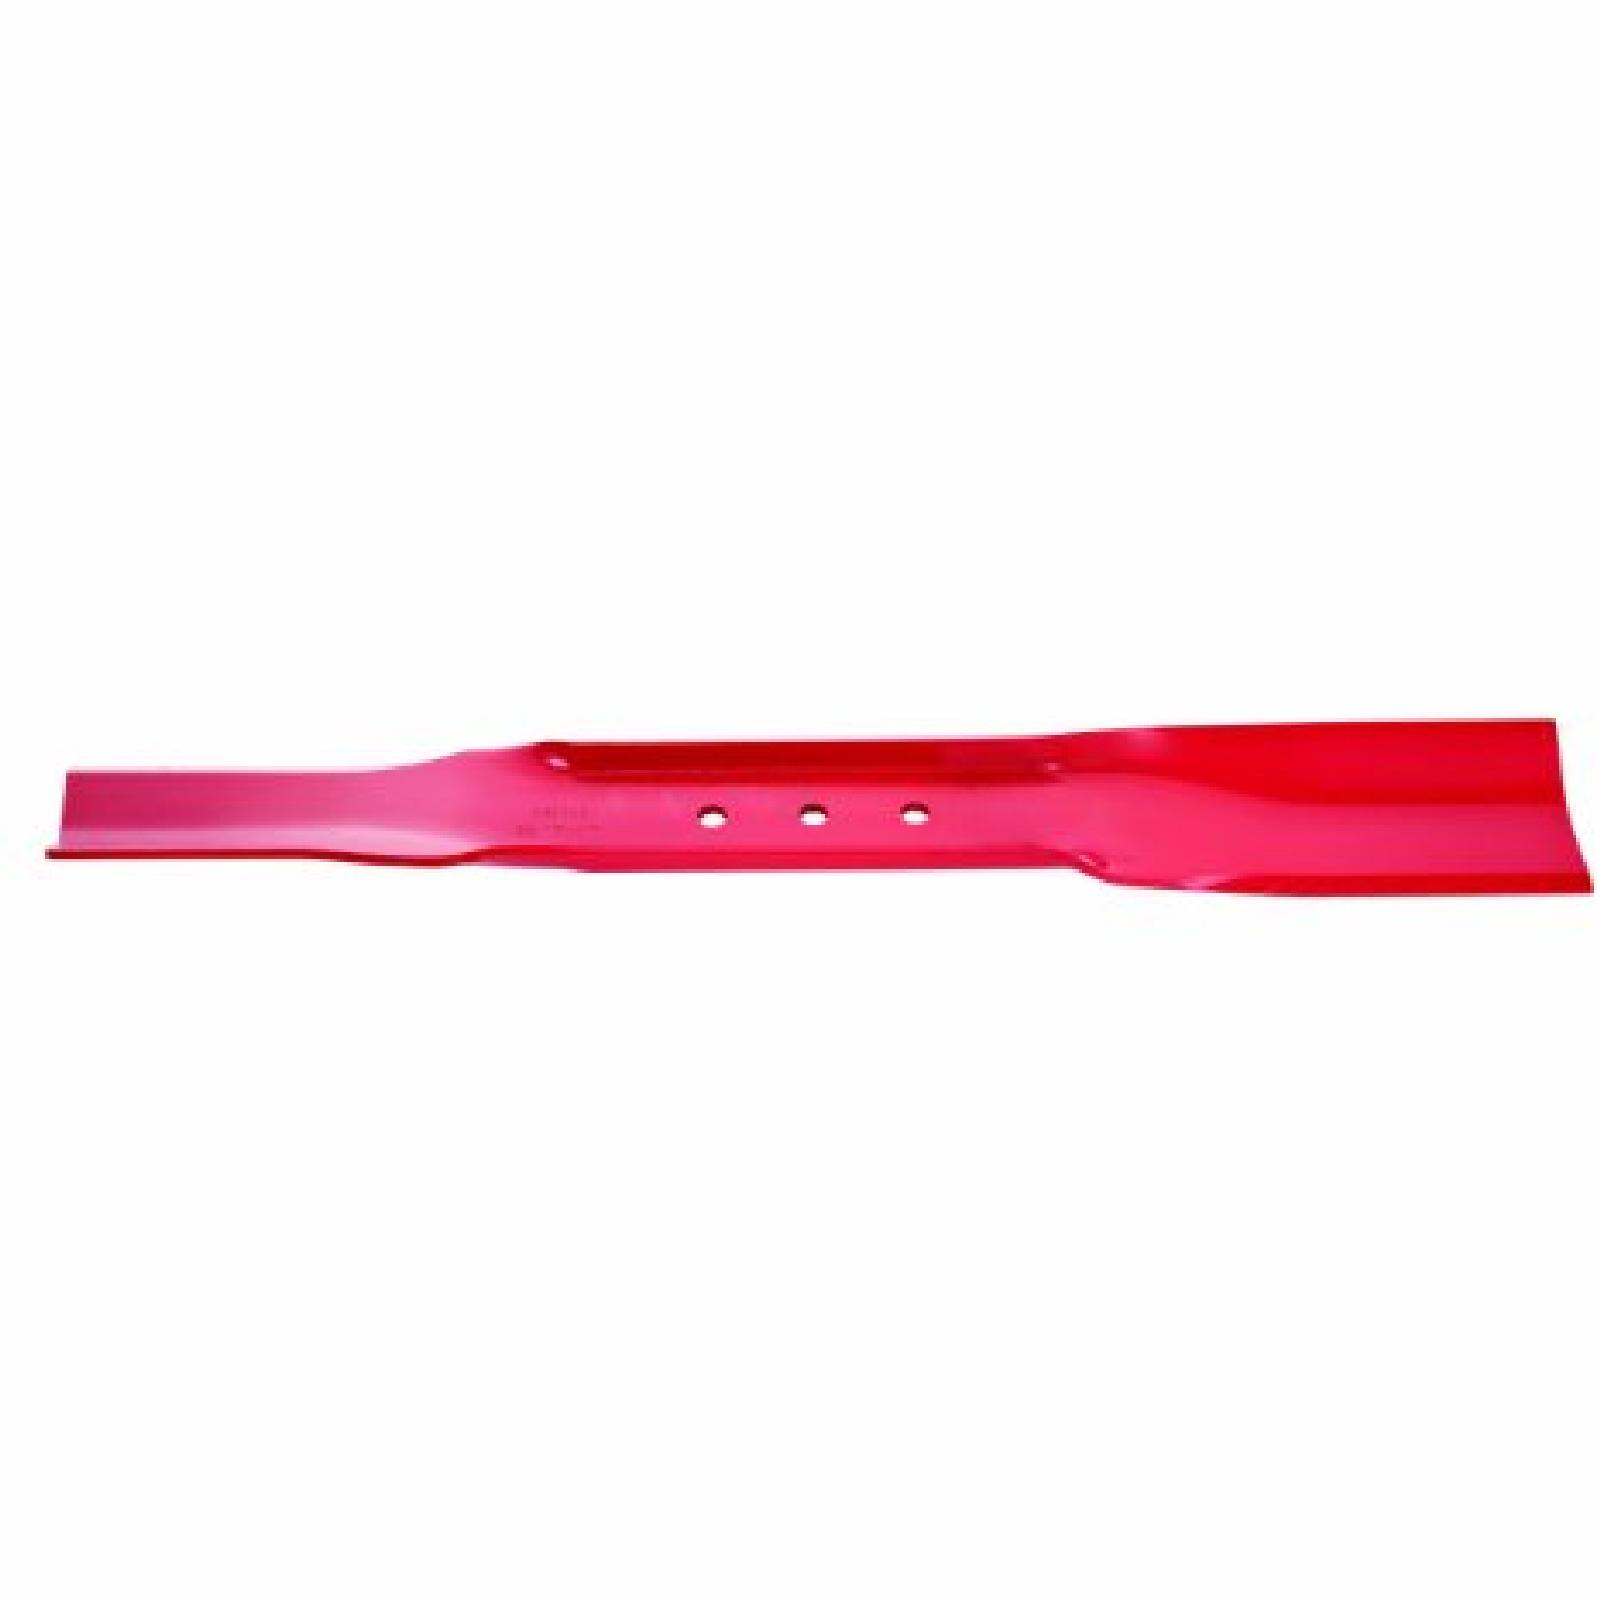 BLADE , SNAPPER 7026691BZY part# 99-103 by Oregon